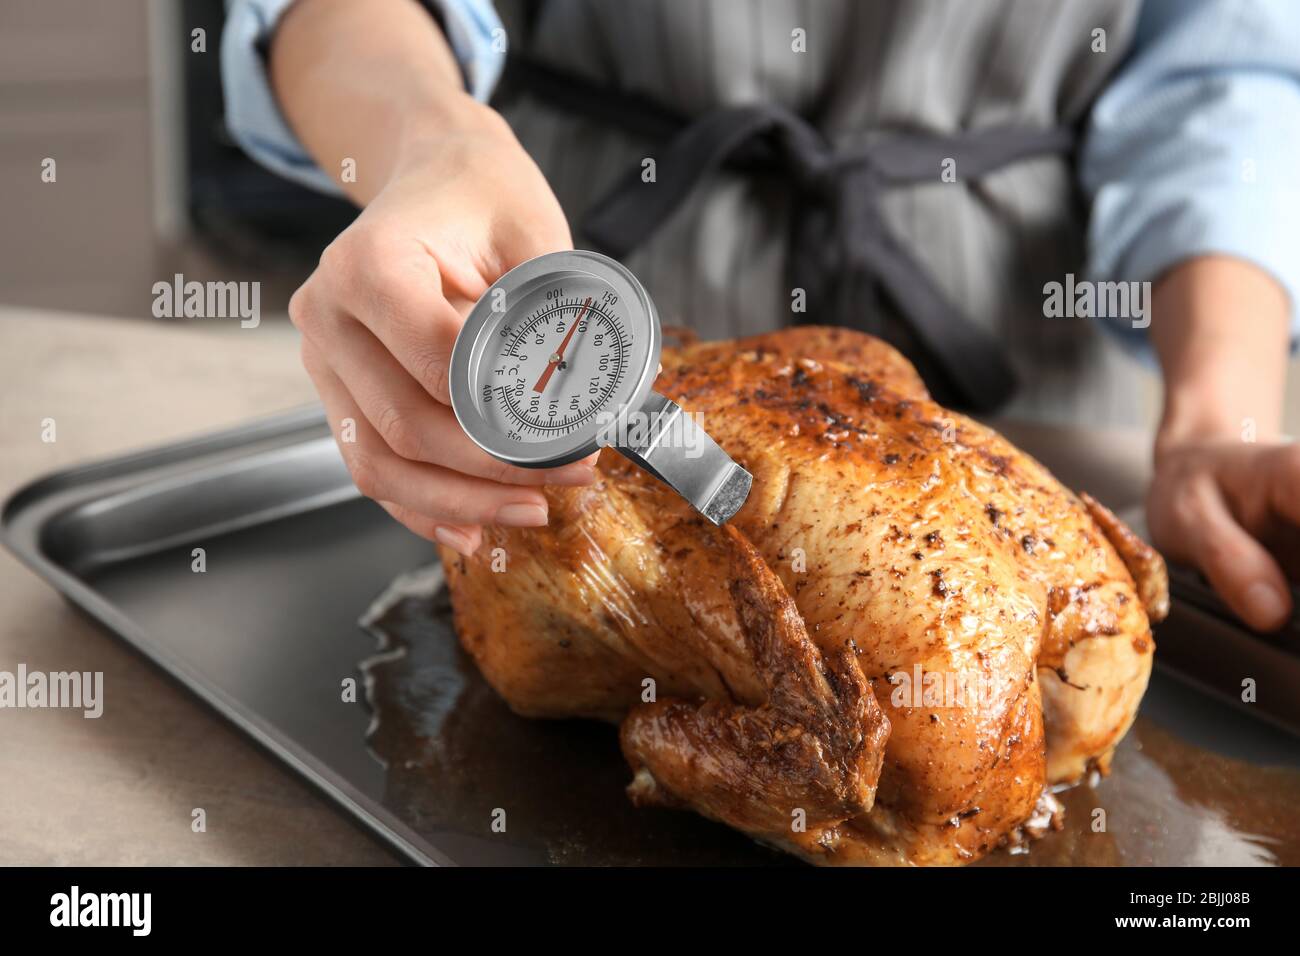 Woman Measuring Temperature of Whole Roasted Turkey with Meat Thermometer  Stock Image - Image of kitchen, gourmet: 149091947